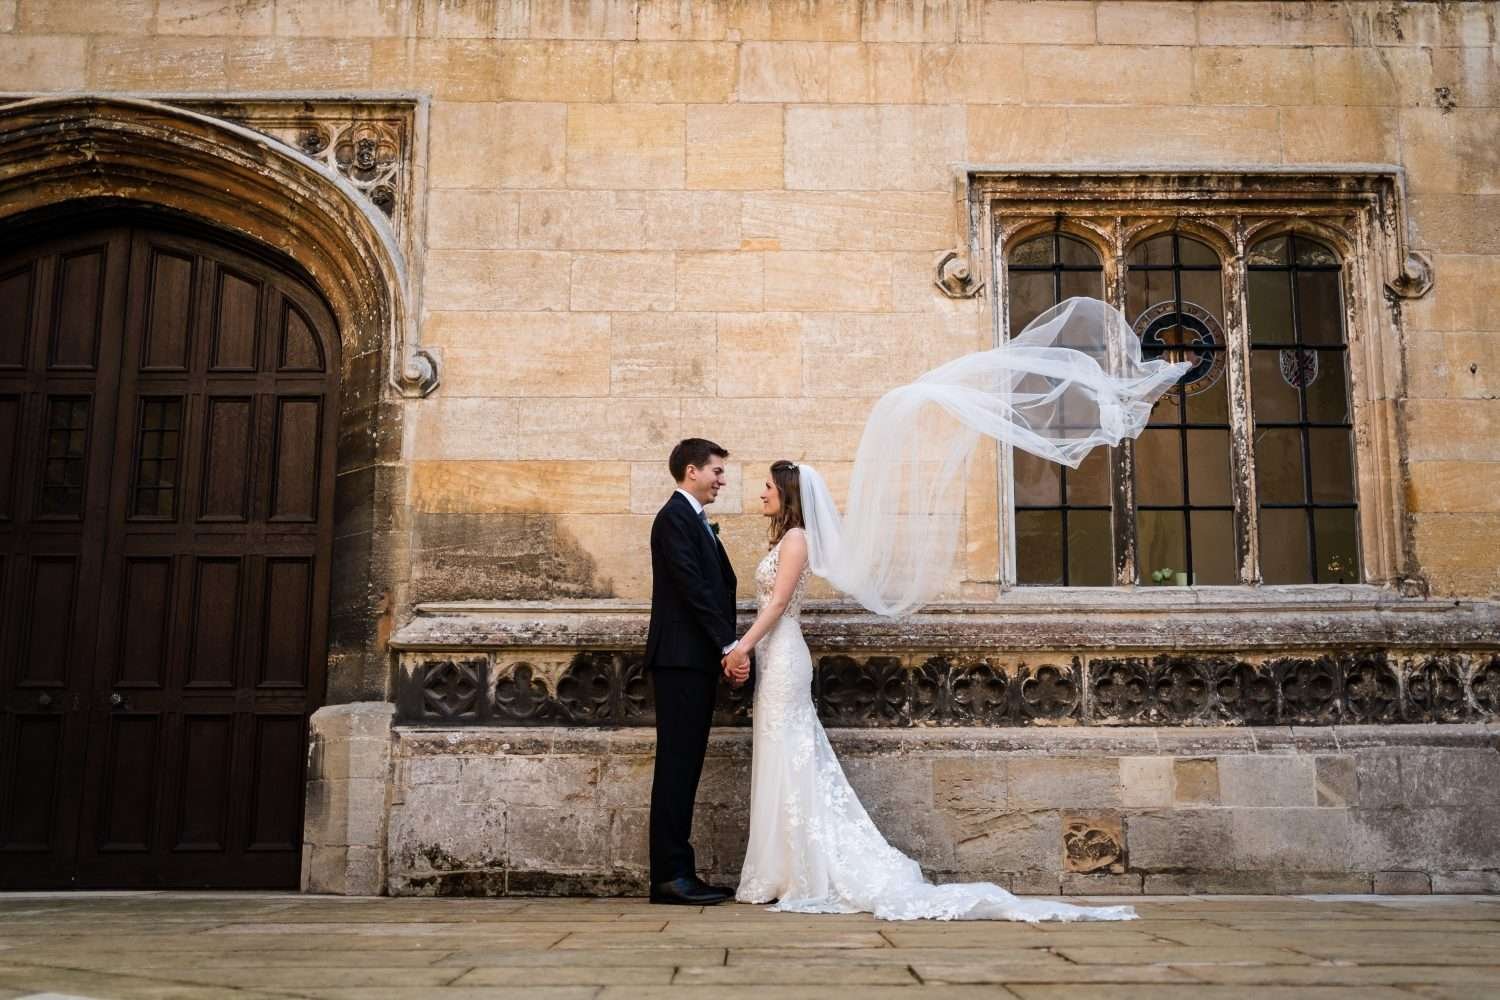 wedding portrait at hengrave hall in suffolk. The couple face each other while holding hands in the courtyard. The brides veil is caught by the wind and swirls behind her. 